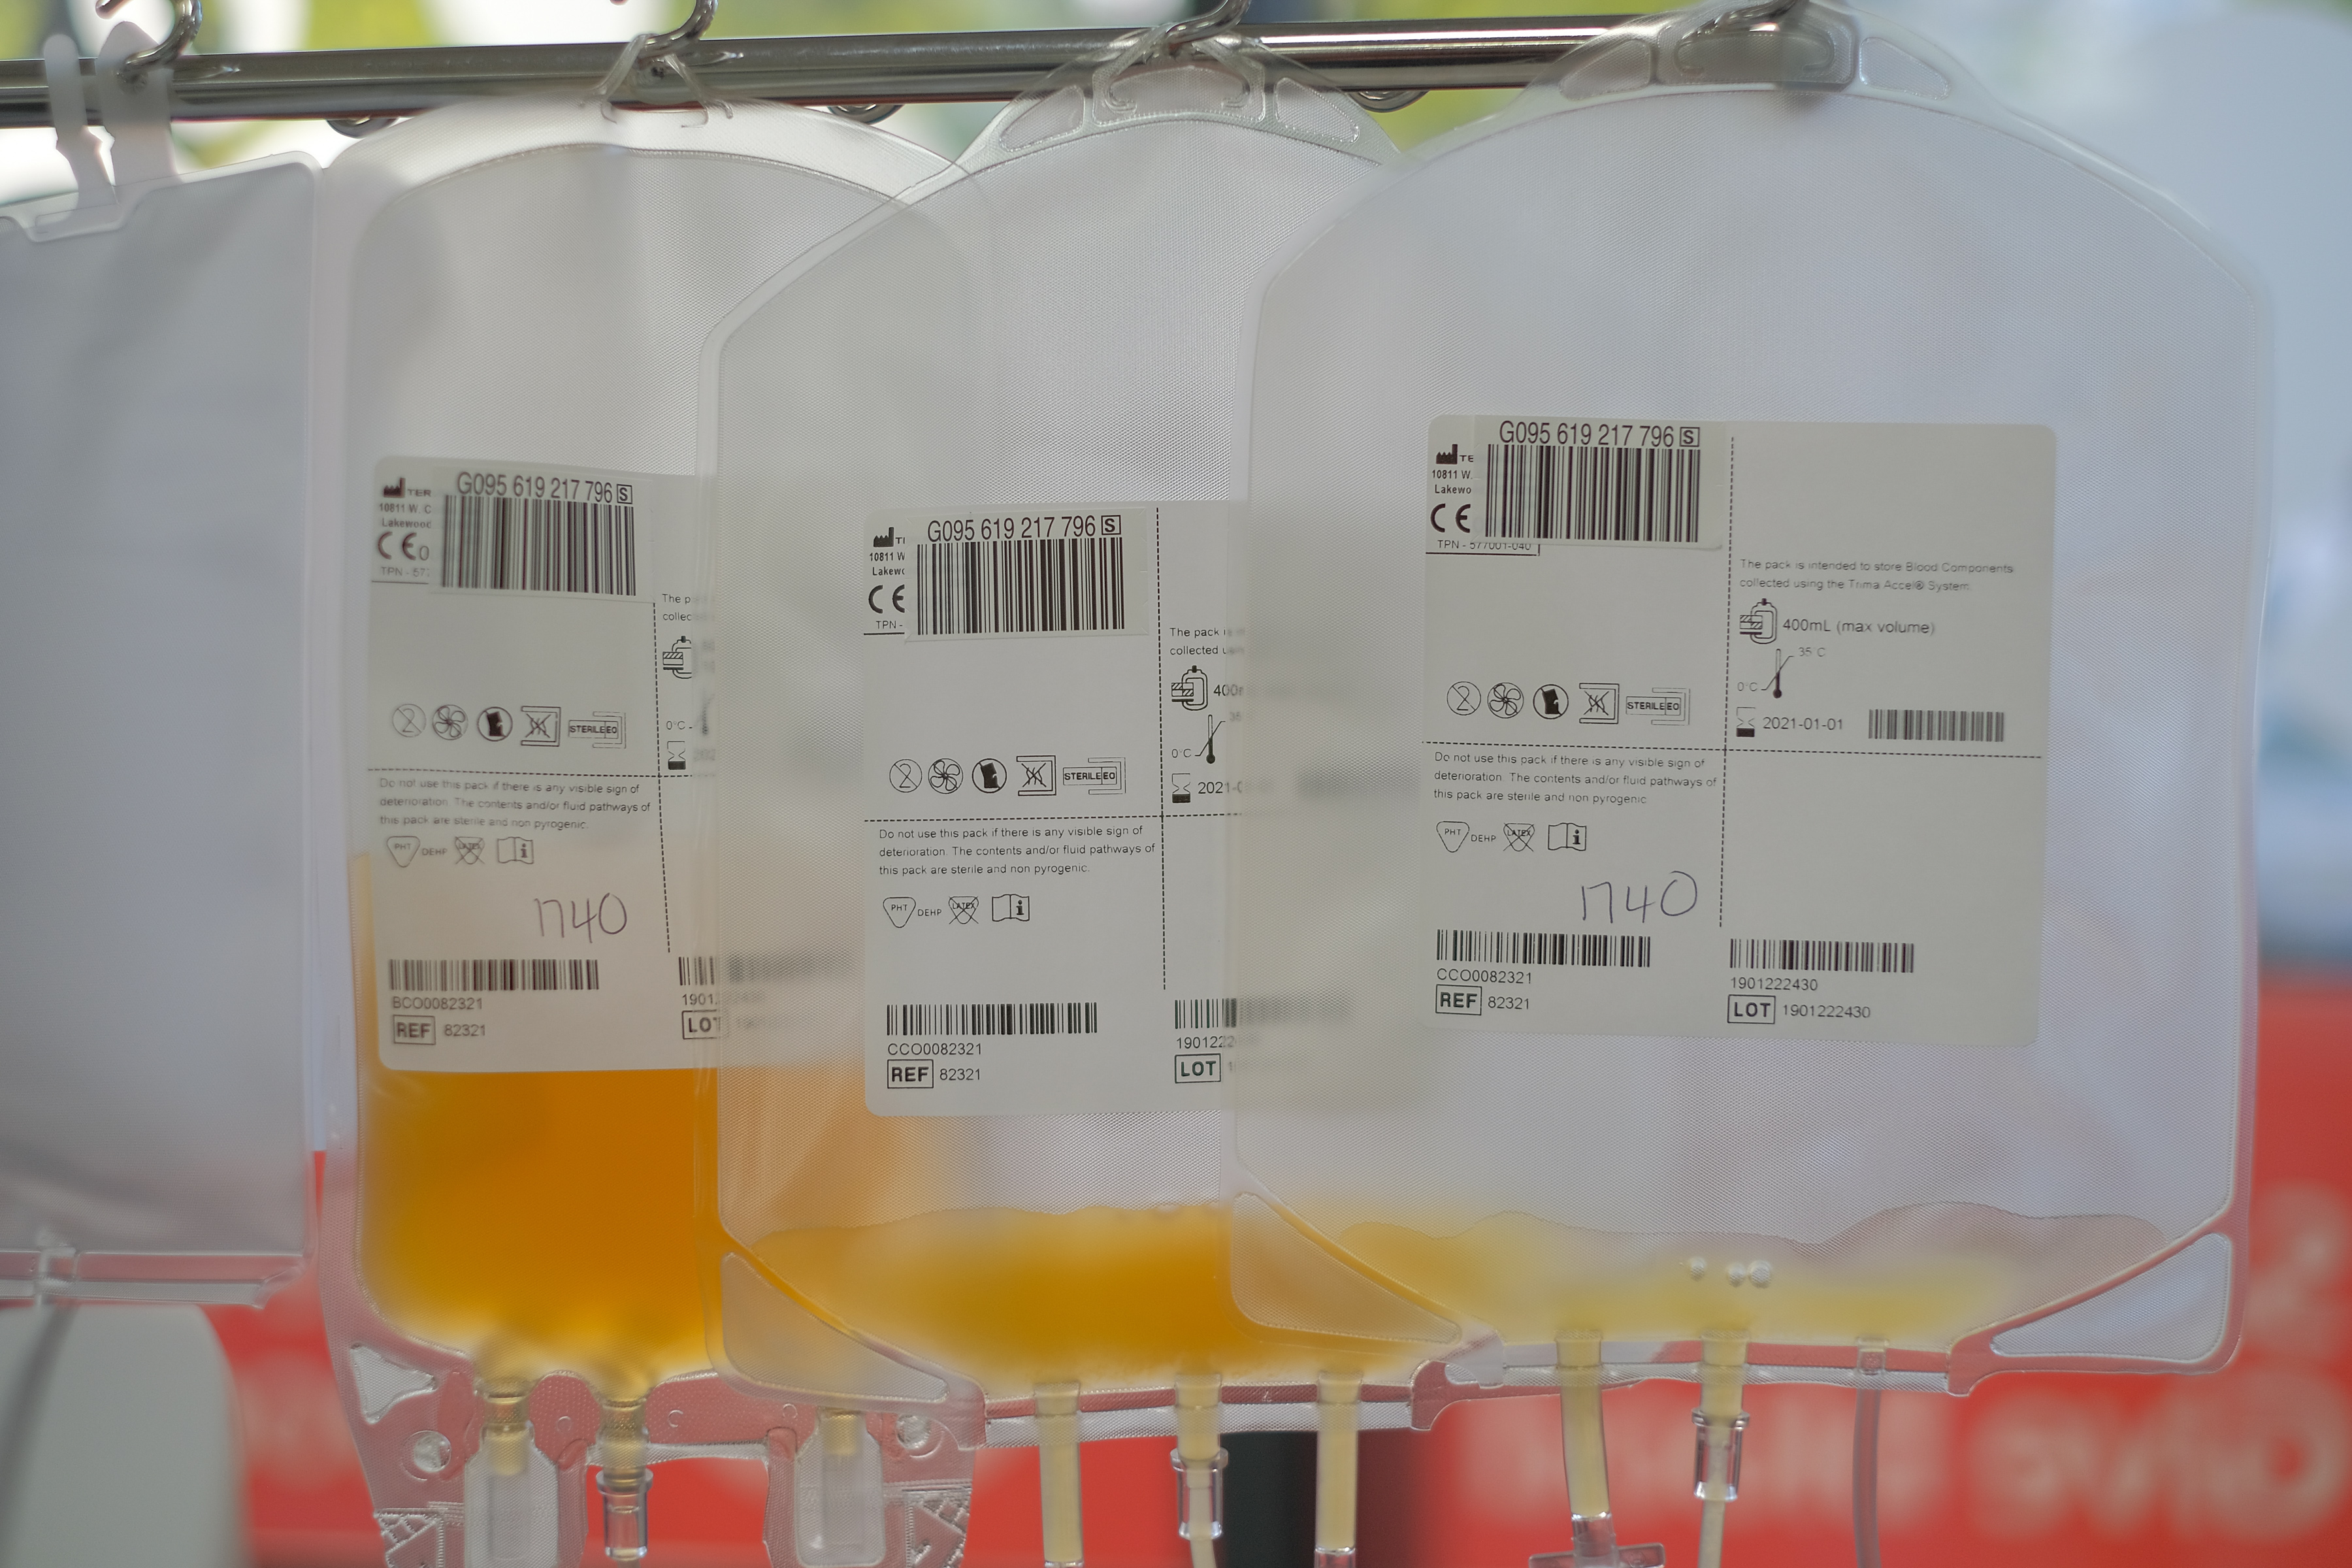 Platelets being collected into blood bags